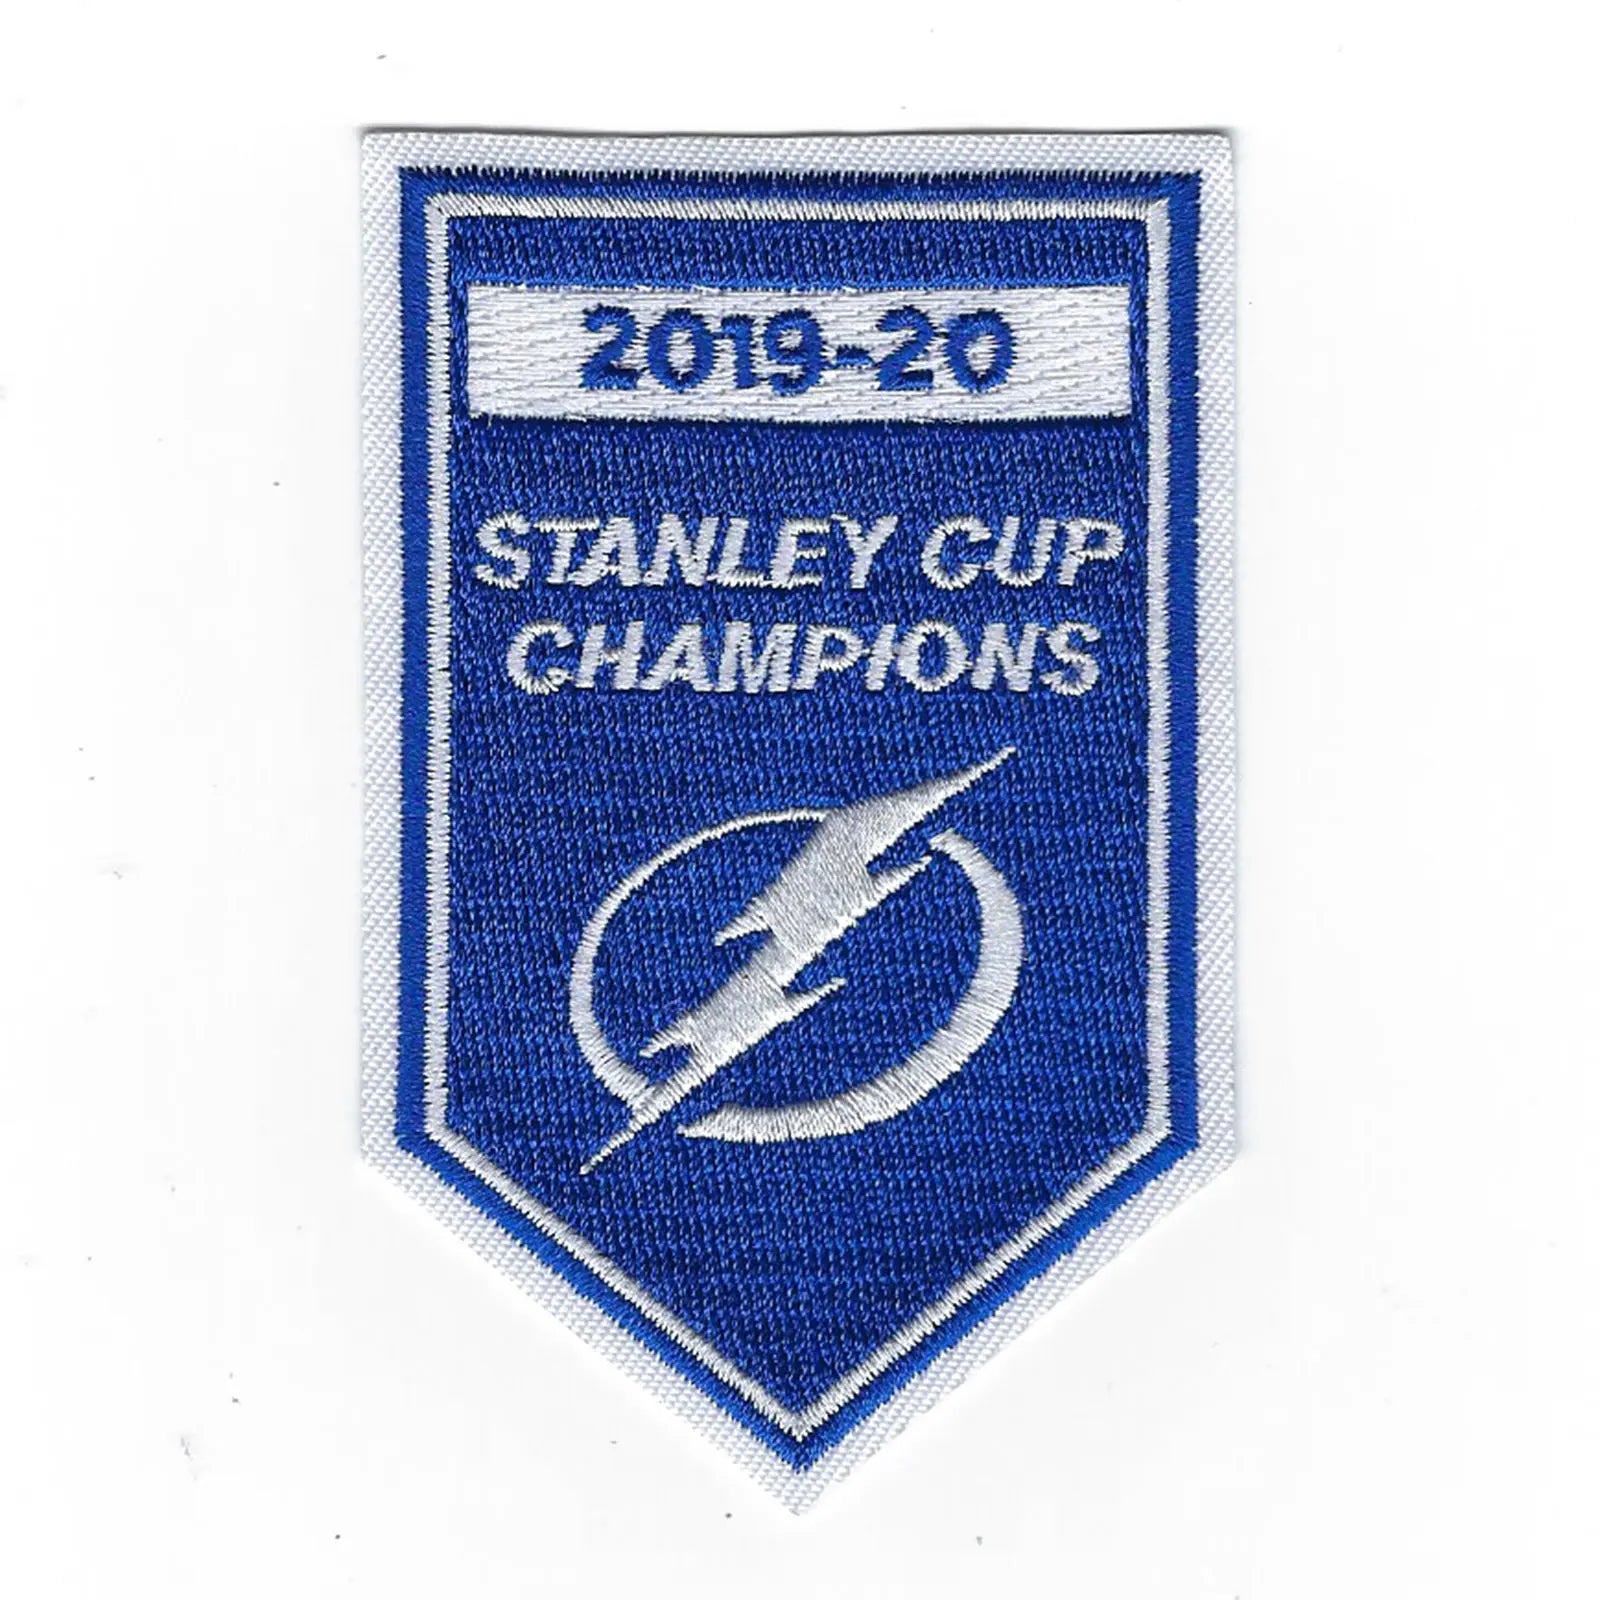 Bruins Wearing Commemorative Stanley Cup Banner Patch on Jerseys